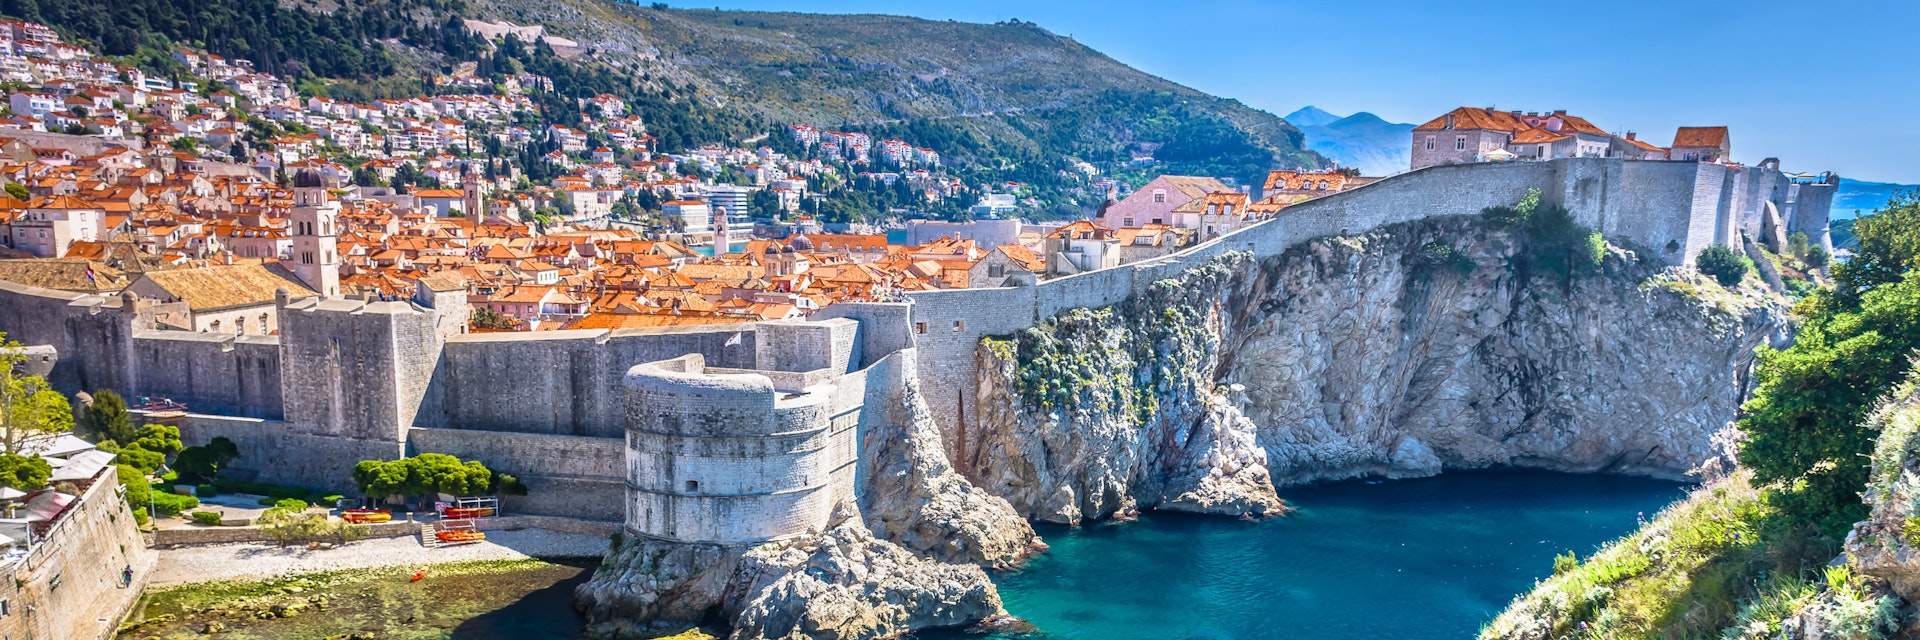 High angle of Dubrovnik's old town and coastal region.